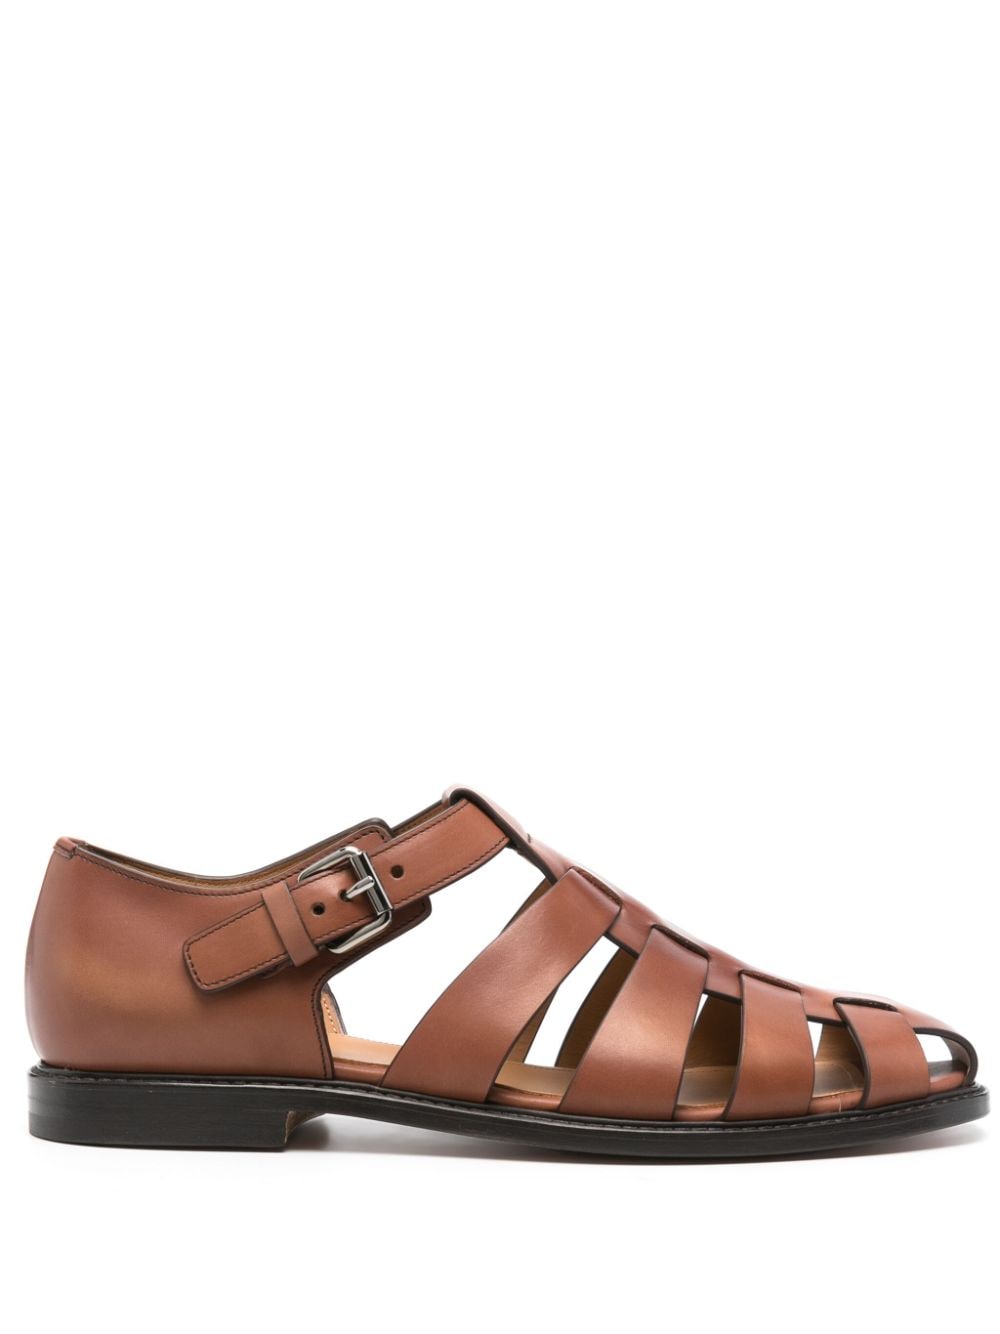 Church's Nevada Leather Sandals In Burnt